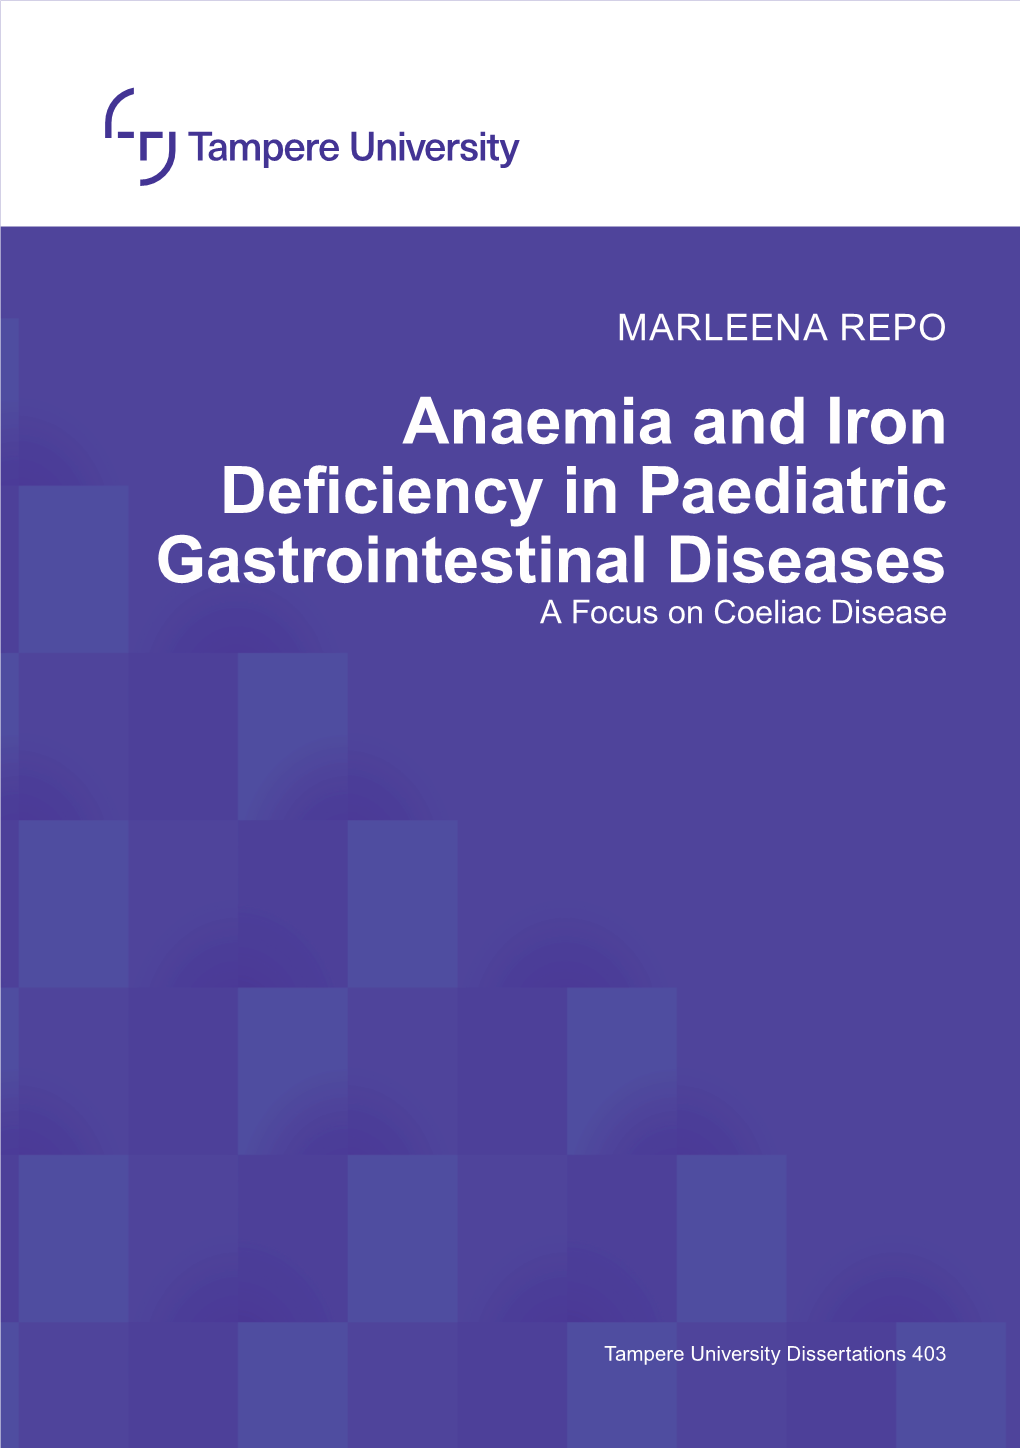 Anaemia and Iron Deficiency in Paediatric Gastrointestinal Diseases